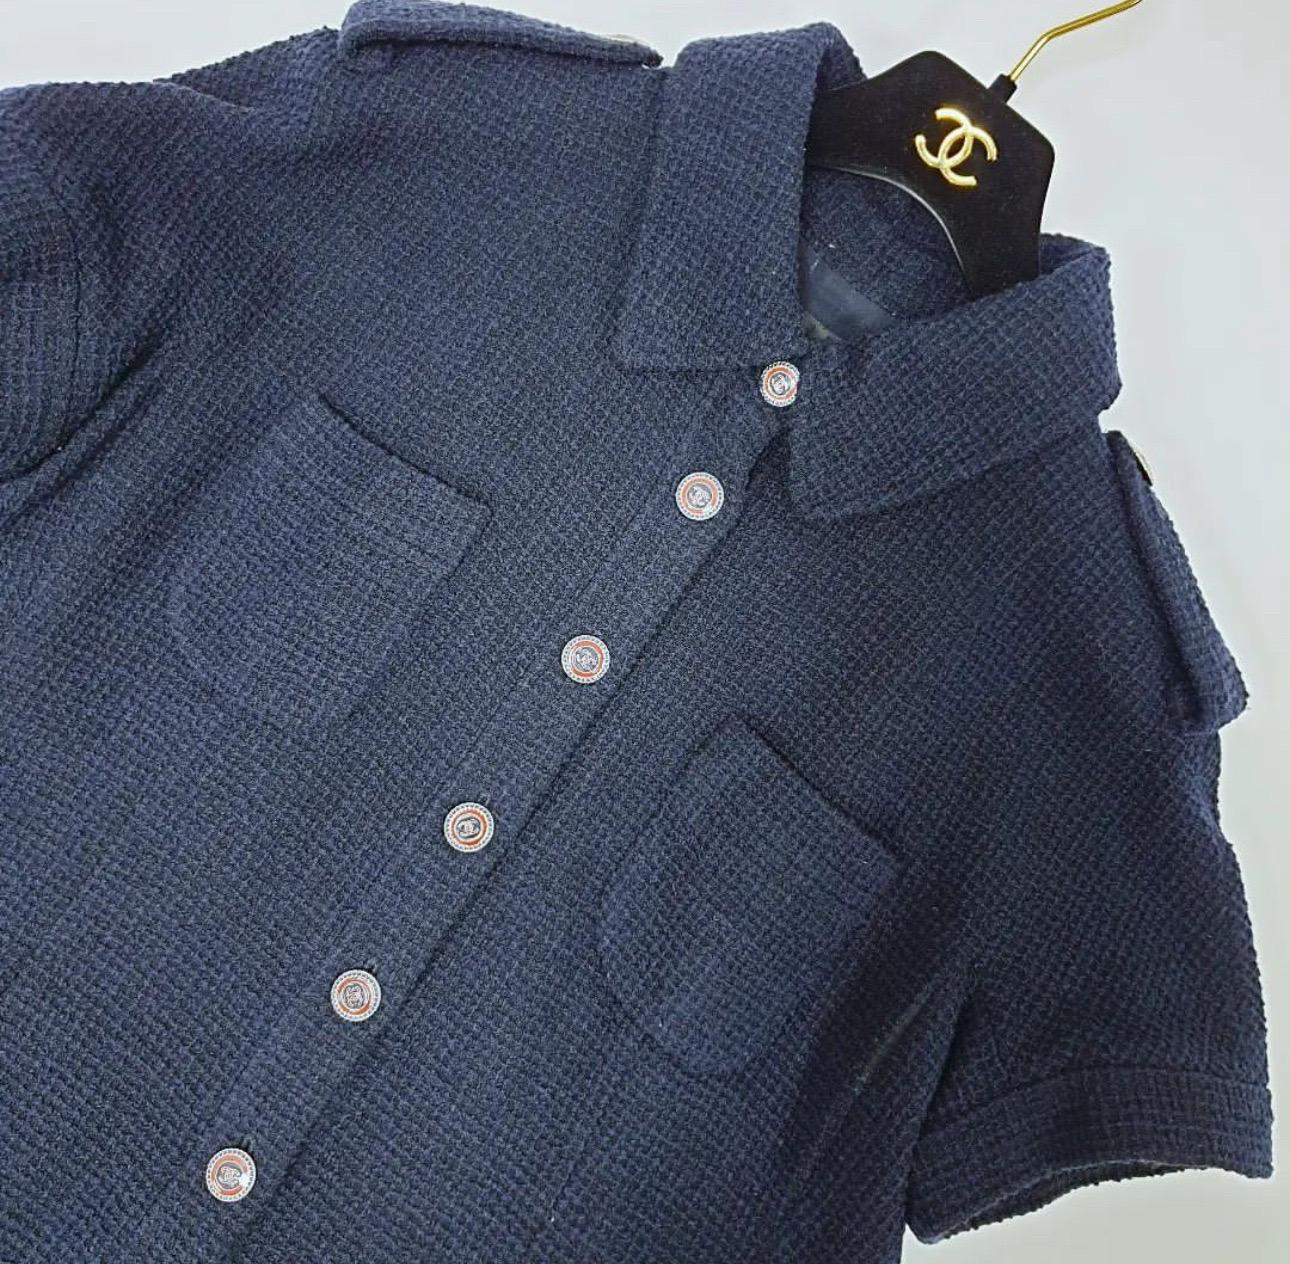 Chanel 2016 Tweed Navy Blue Dress   In Good Condition For Sale In Krakow, PL